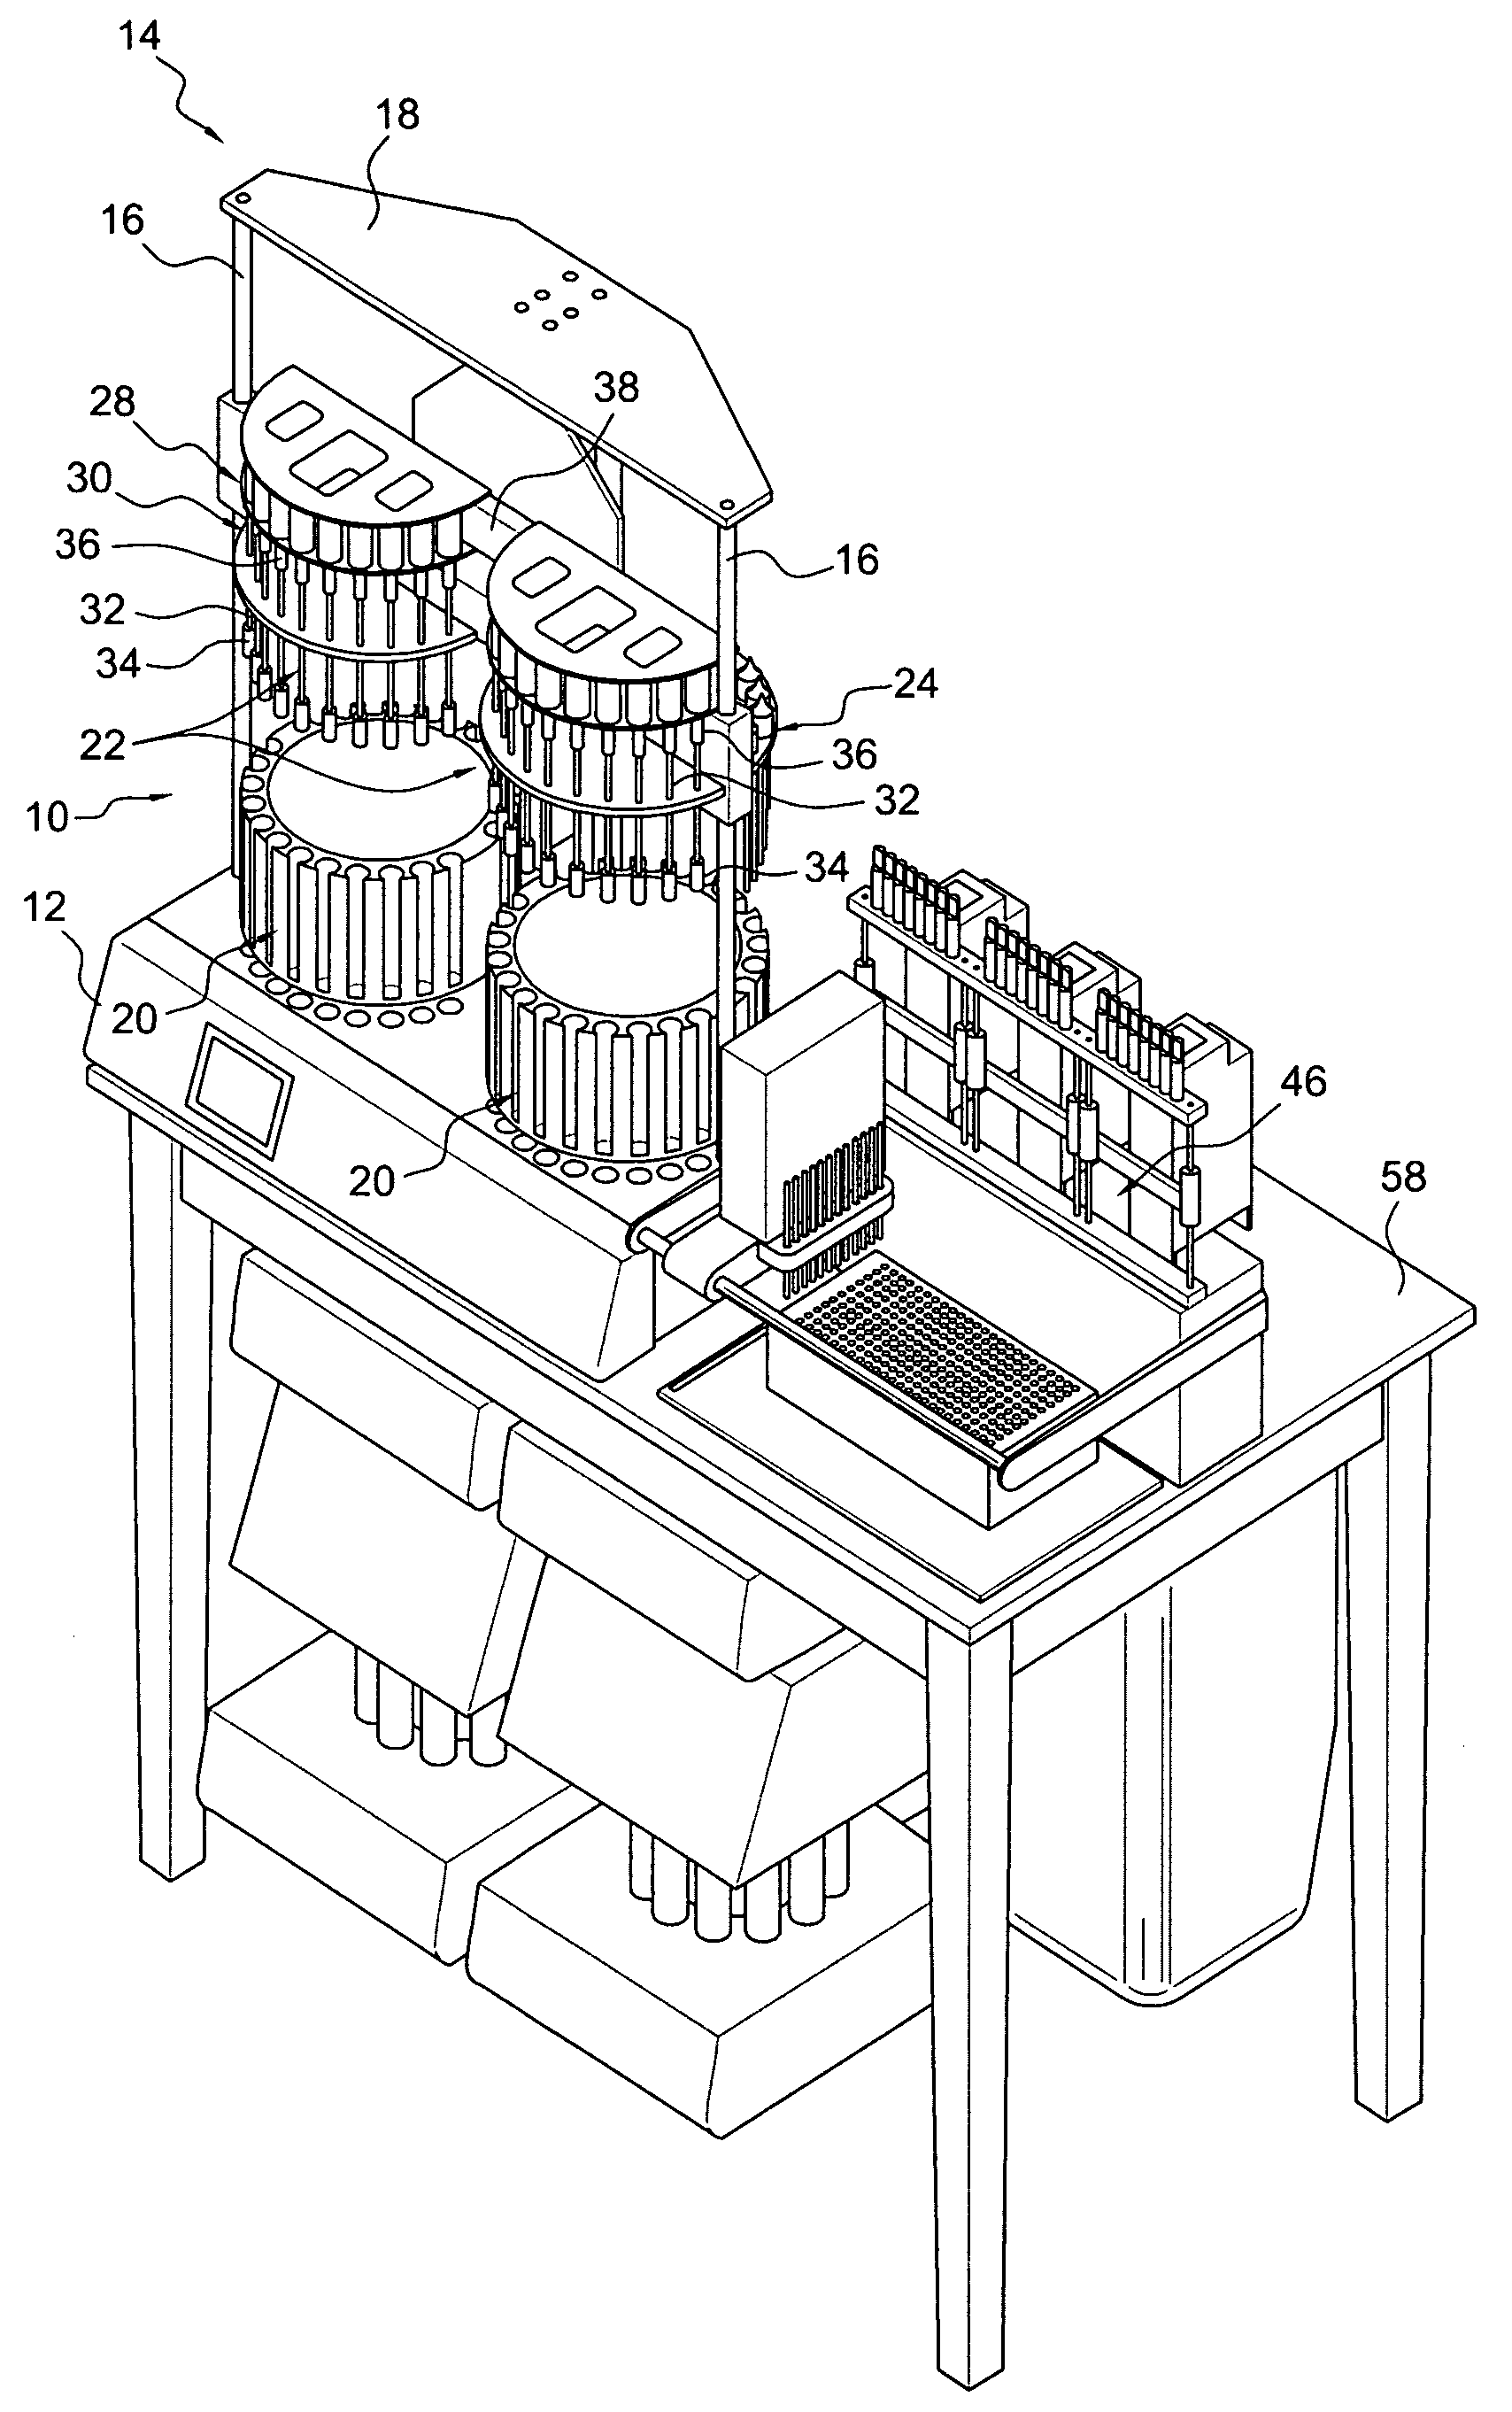 Pharmaceutical product release rate testing device